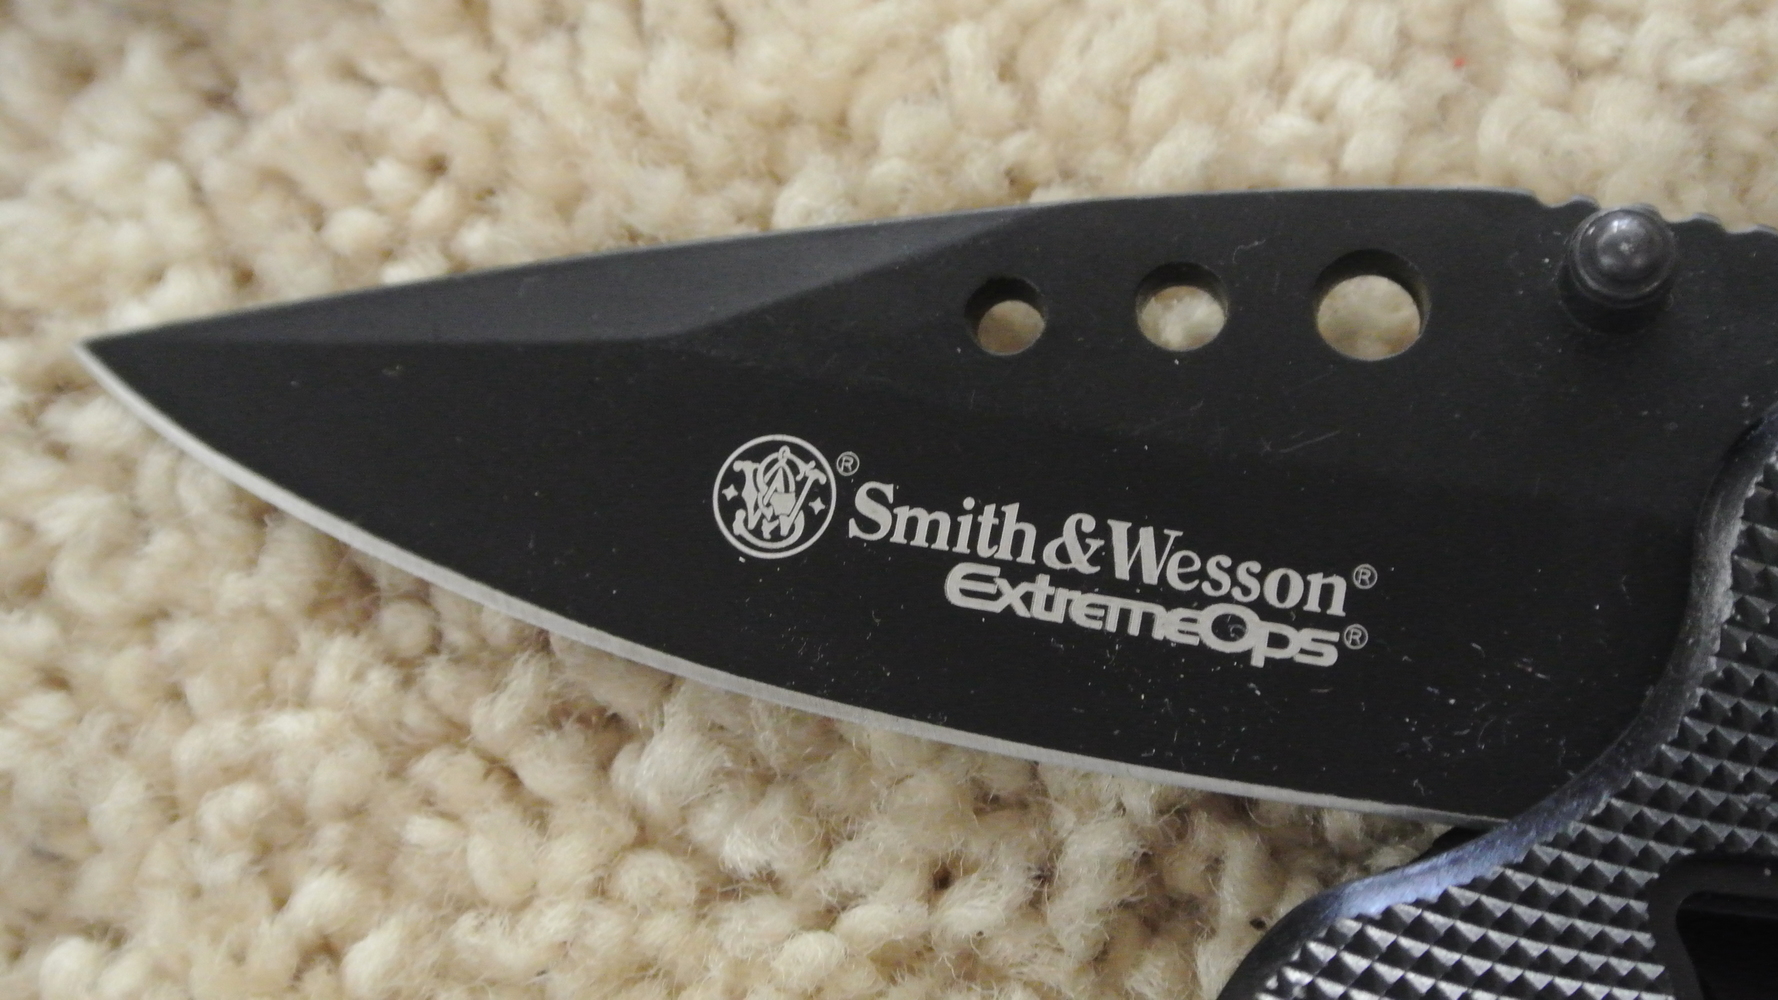 Smith and Wesson knife ExtremeOps model: SWA3, CK10HBS